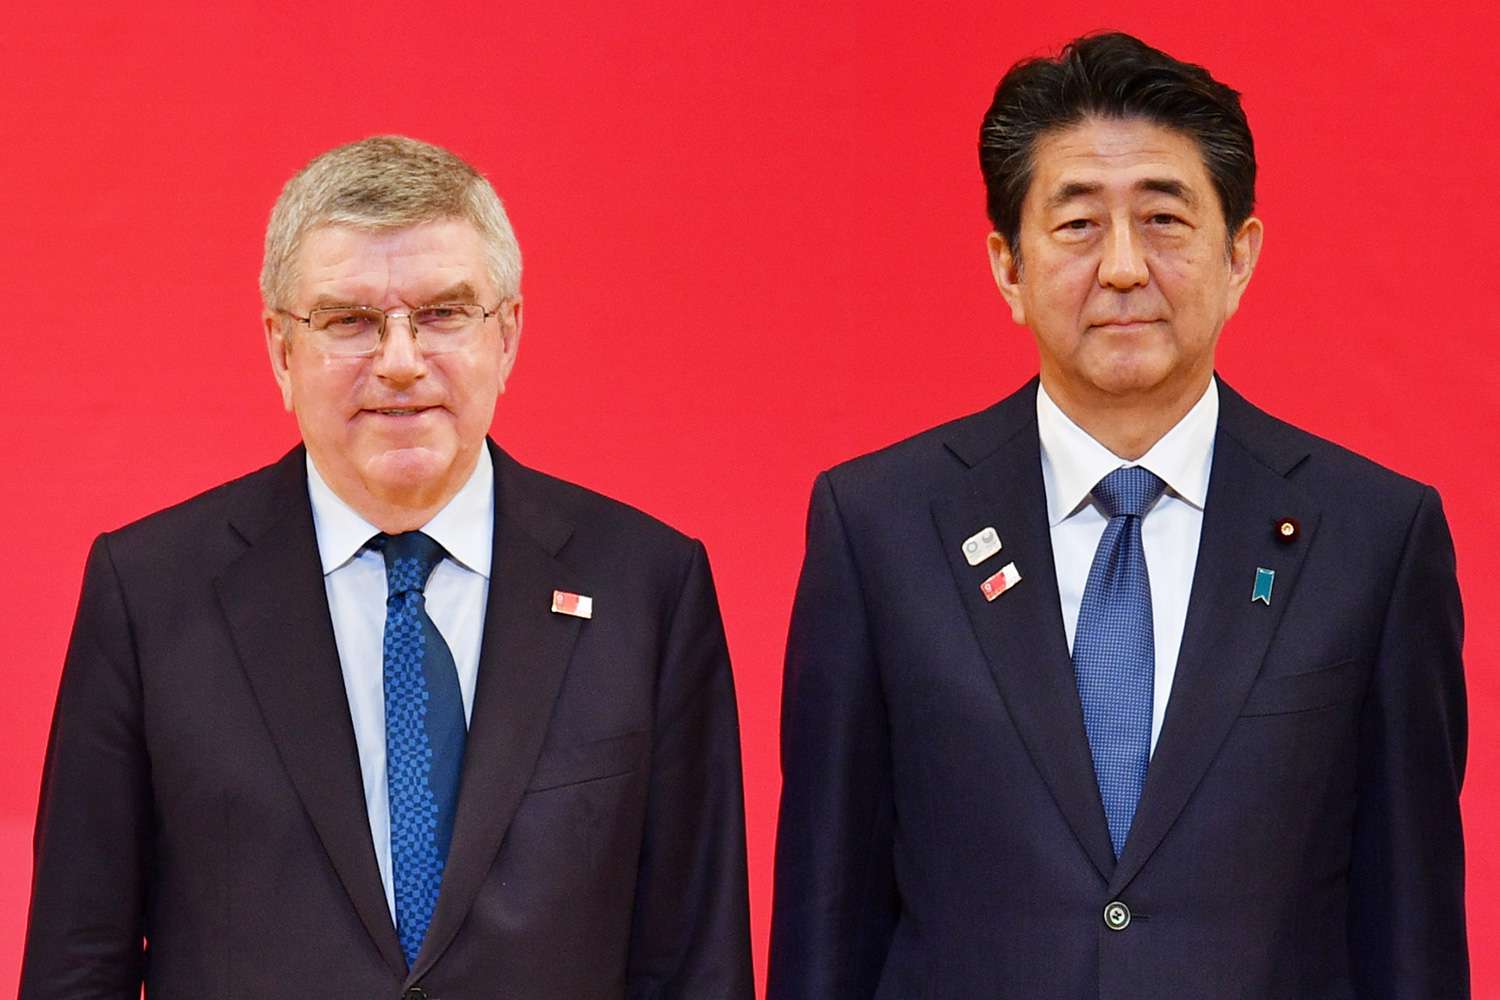 International Olympic Committee (IOC) President Thomas Bach and Japanese Prime Minister Shinzo Abe